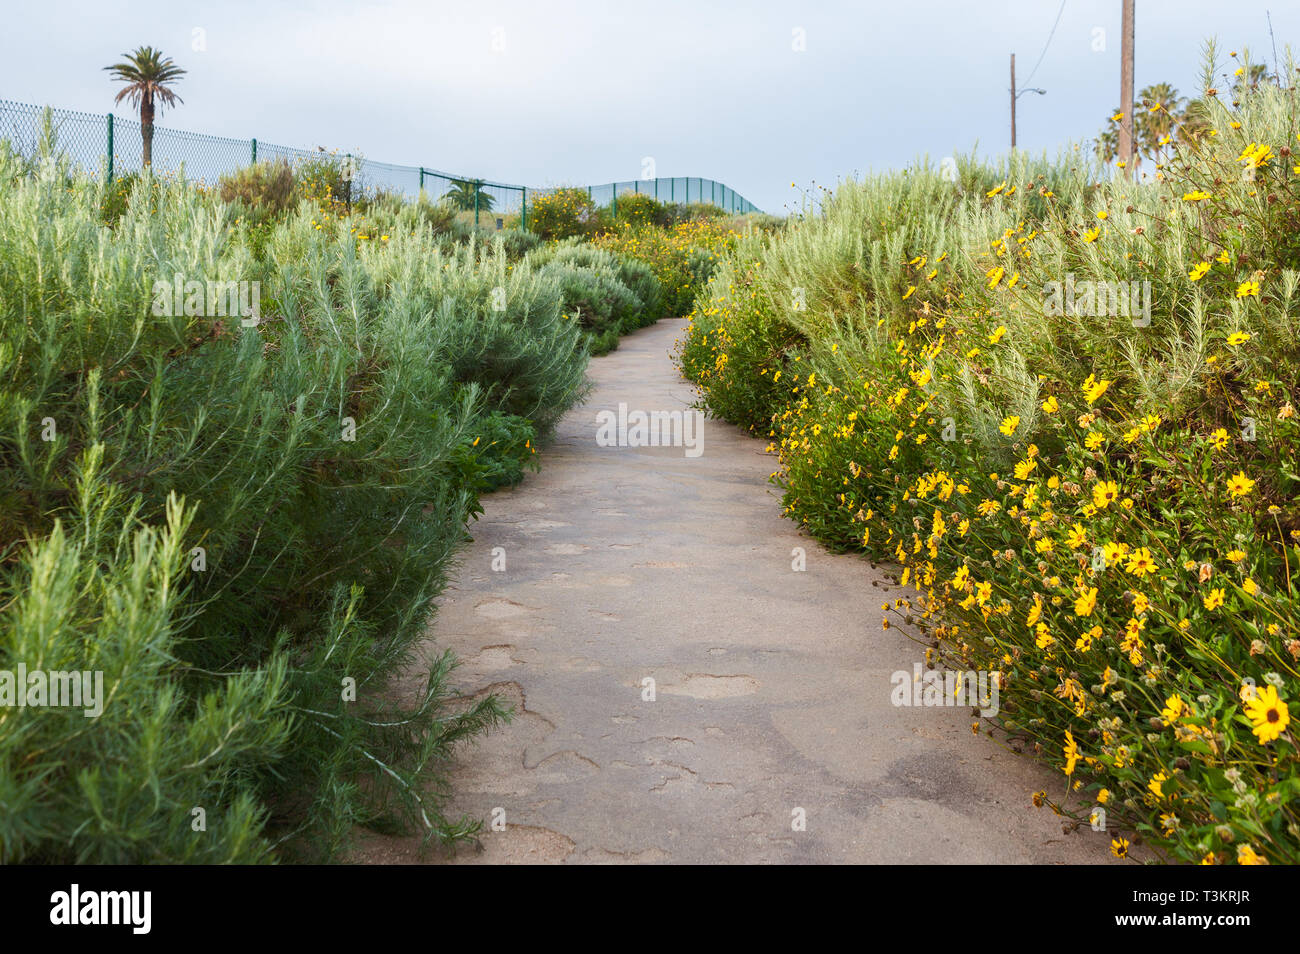 Early Morning walk at the Waterview Trail in Playa Del Rey, CA 90293 Stock Photo